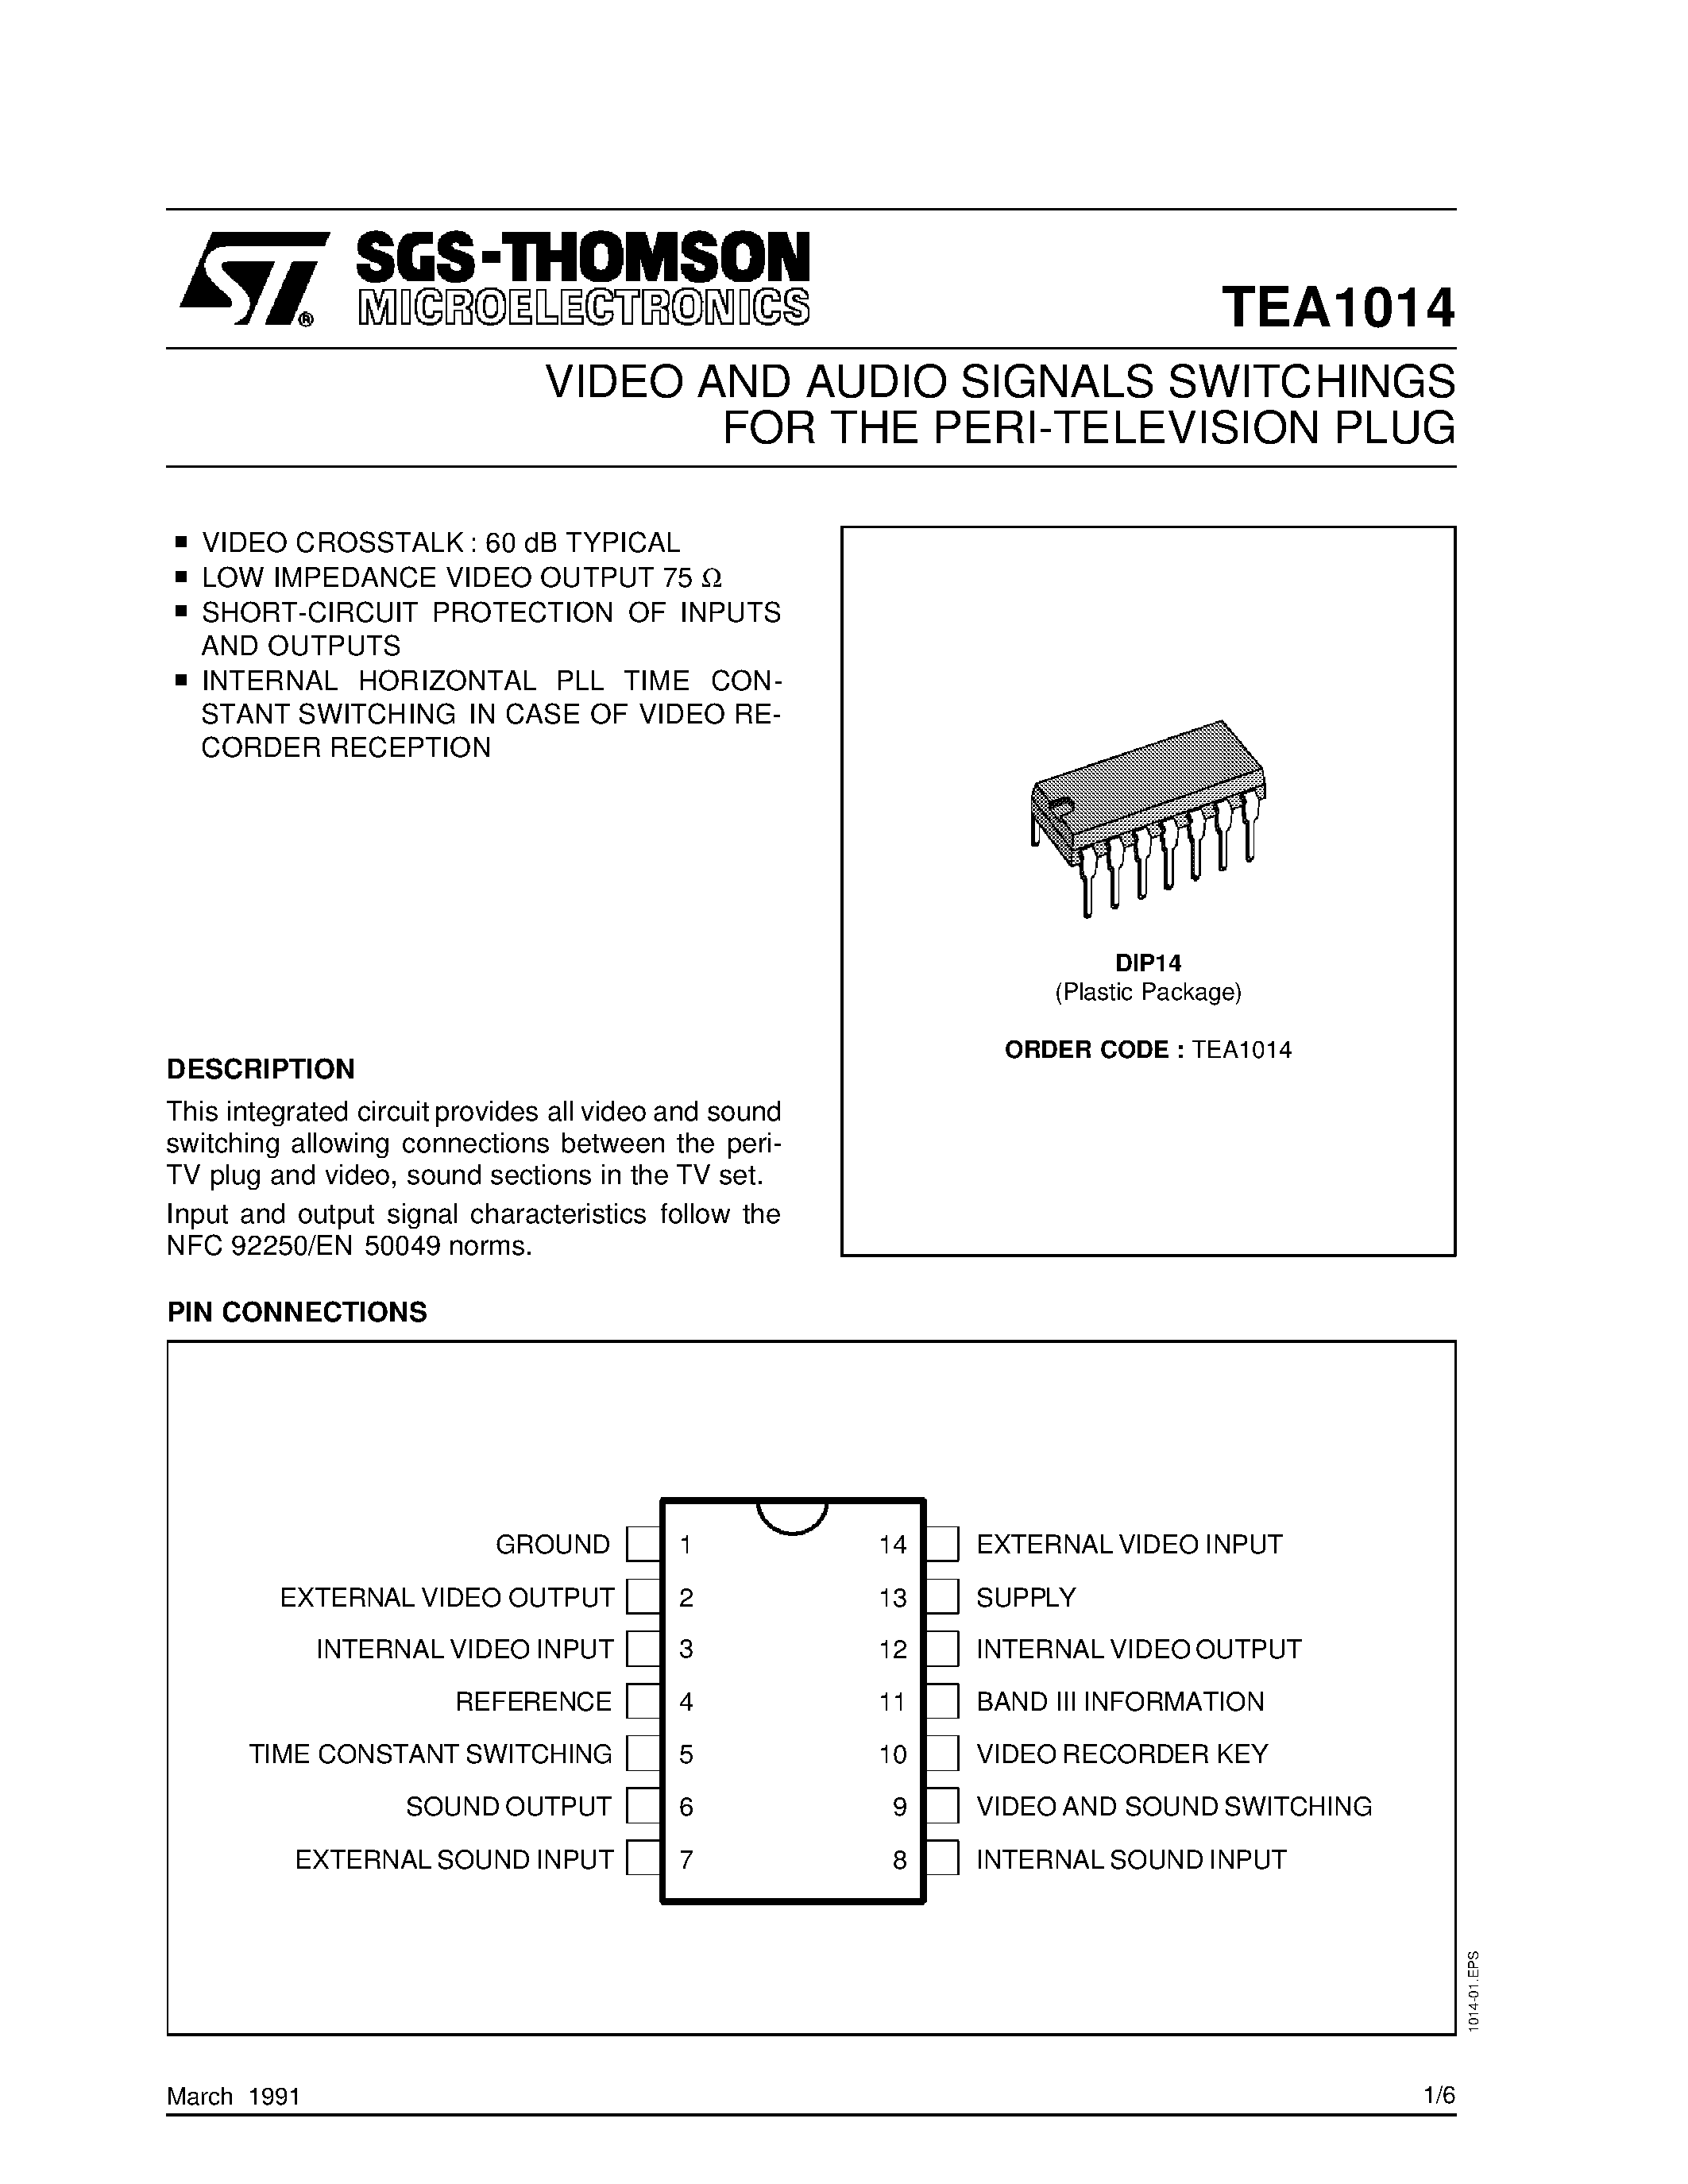 Datasheet TEA1014 - VIDEO AND AUDIO SIGNALS SWITCHINGS FOR THE PERI-TELEVISION PLUG page 1